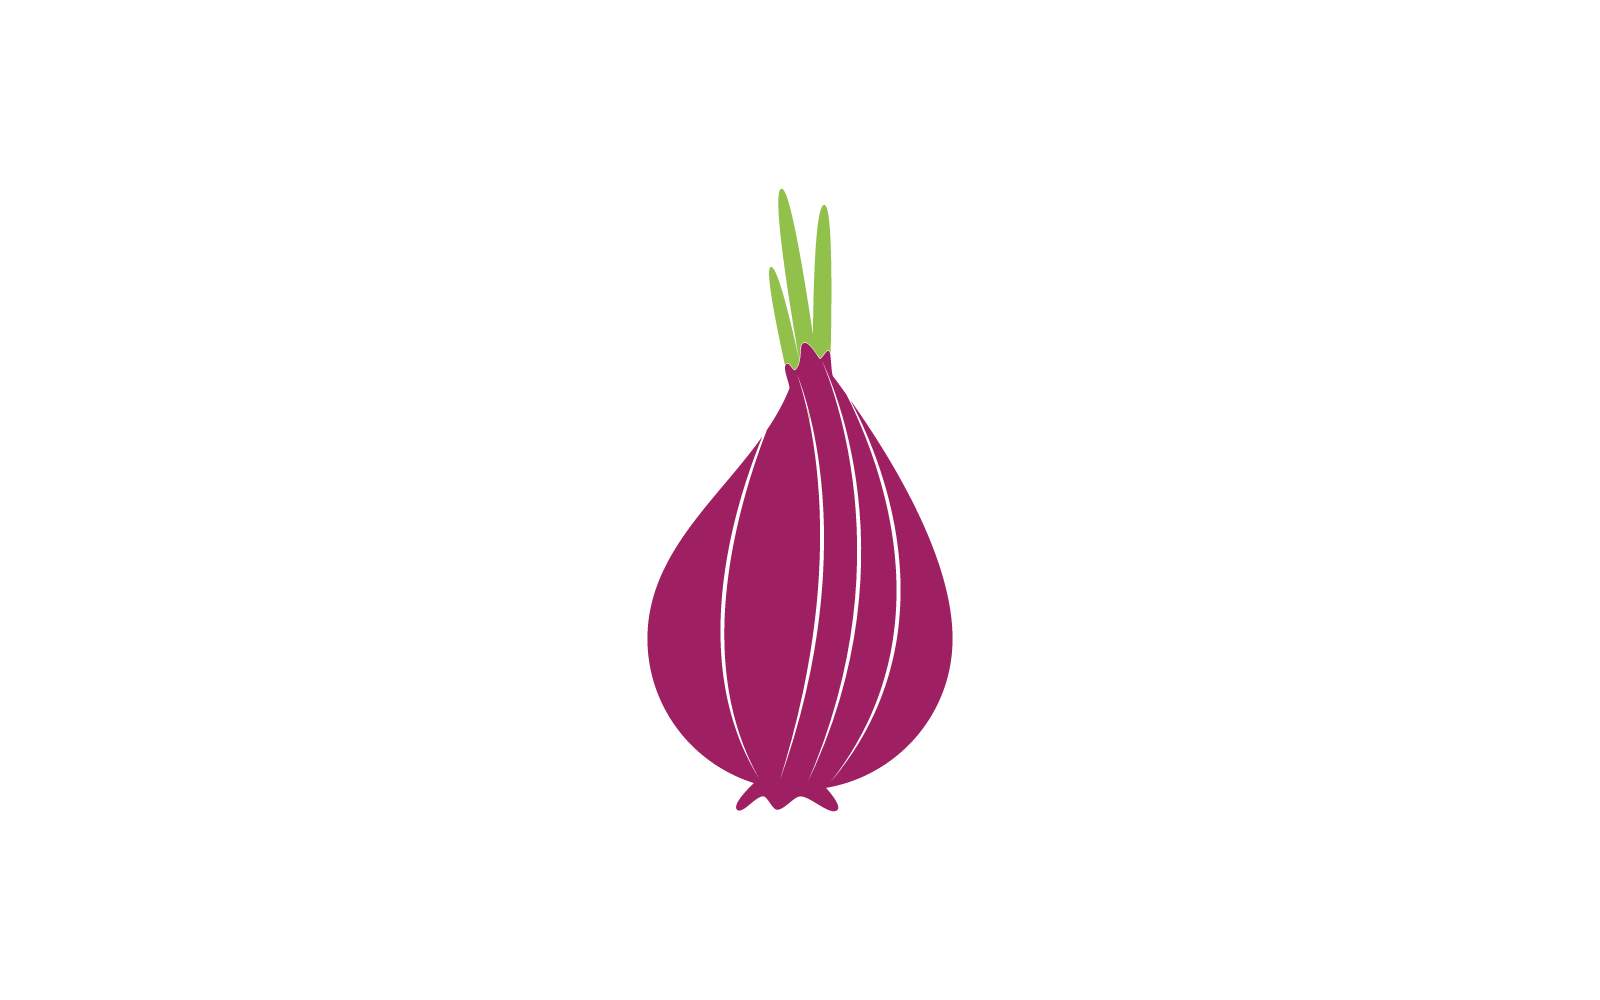 Onion on white background vector flat design